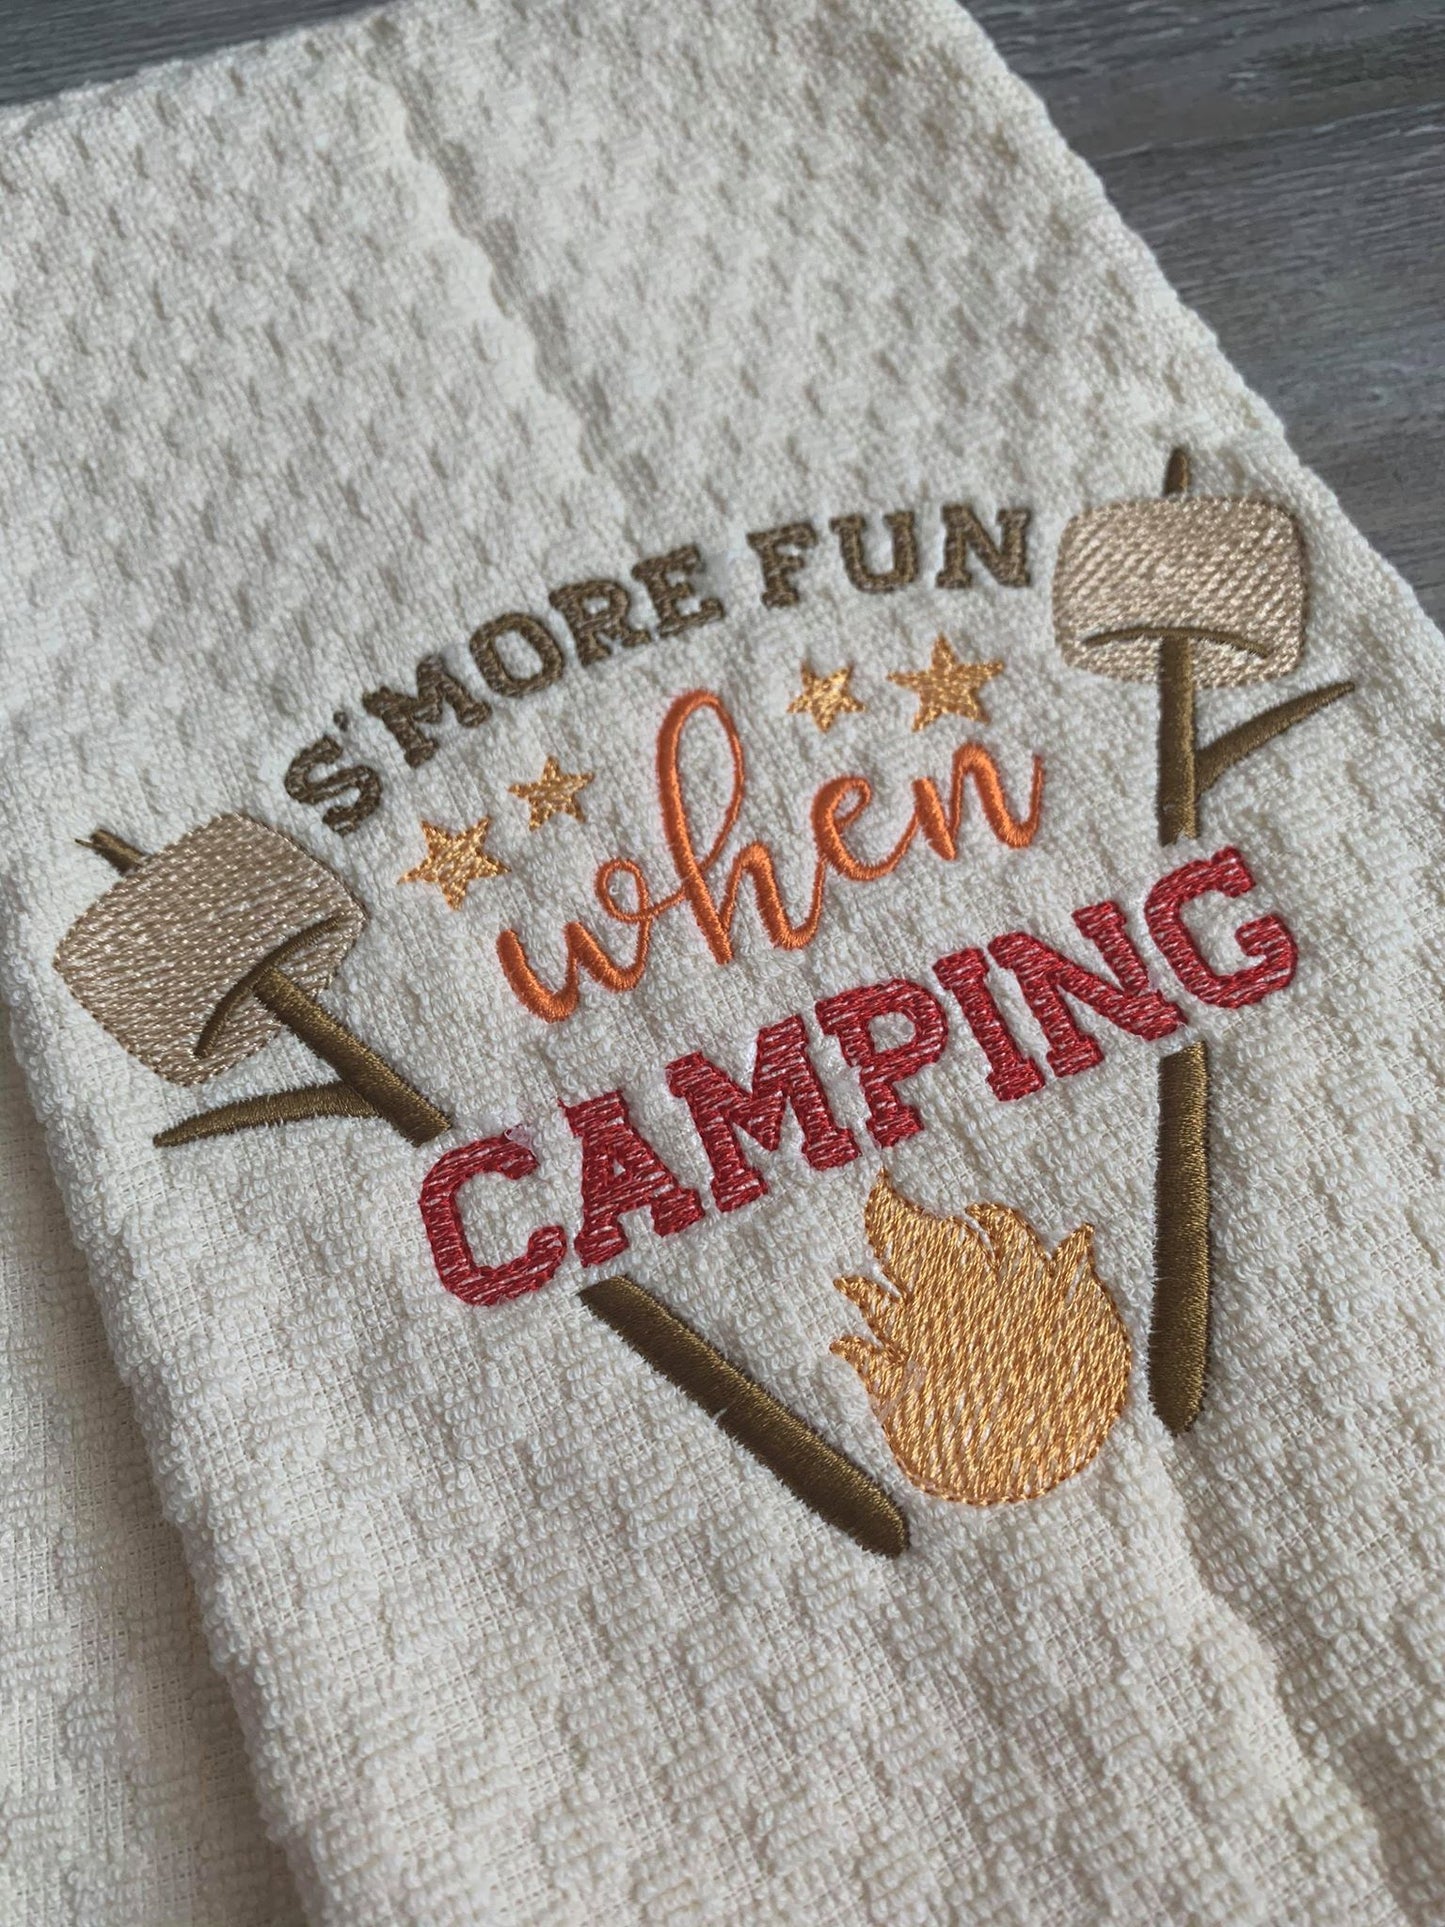 S'more Fun When Camping - 2 Sizes - Digital Embroidery Design